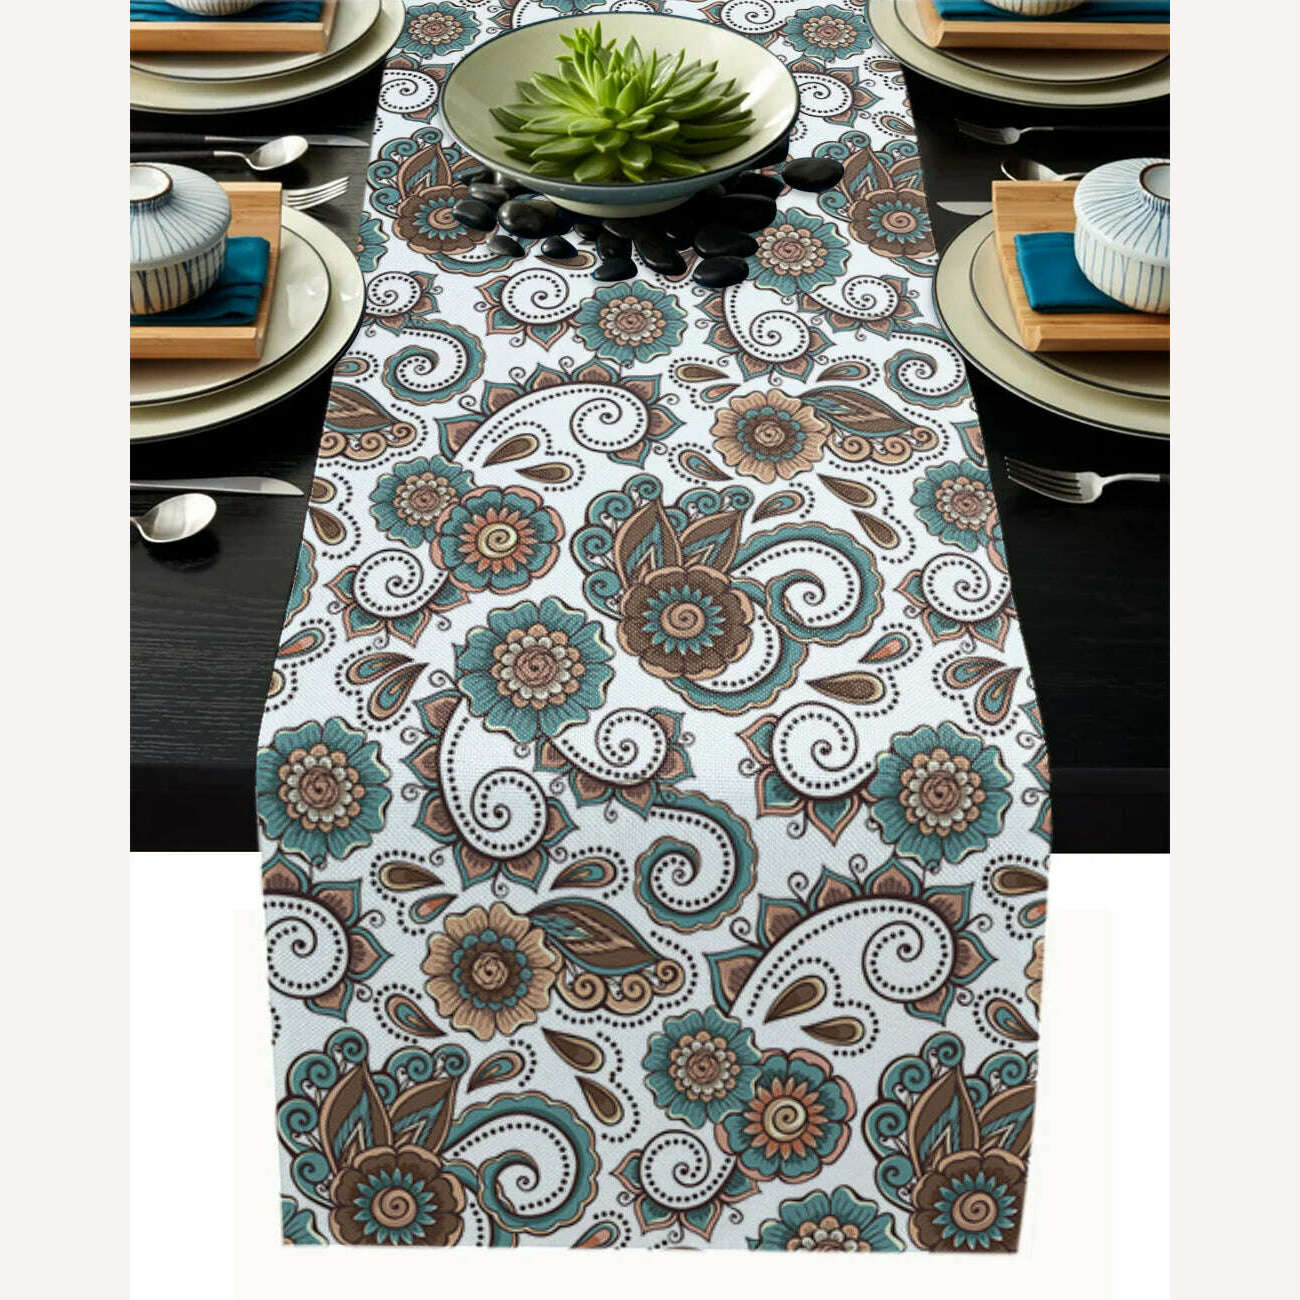 KIMLUD, Linen Burlap Table Runner Colorful Morocco Flowers Islam Arabesque Kitchen Table Runners Dinner Party Wedding Events Decor, LXM00750 / 150x33cm59x13inch, KIMLUD Womens Clothes